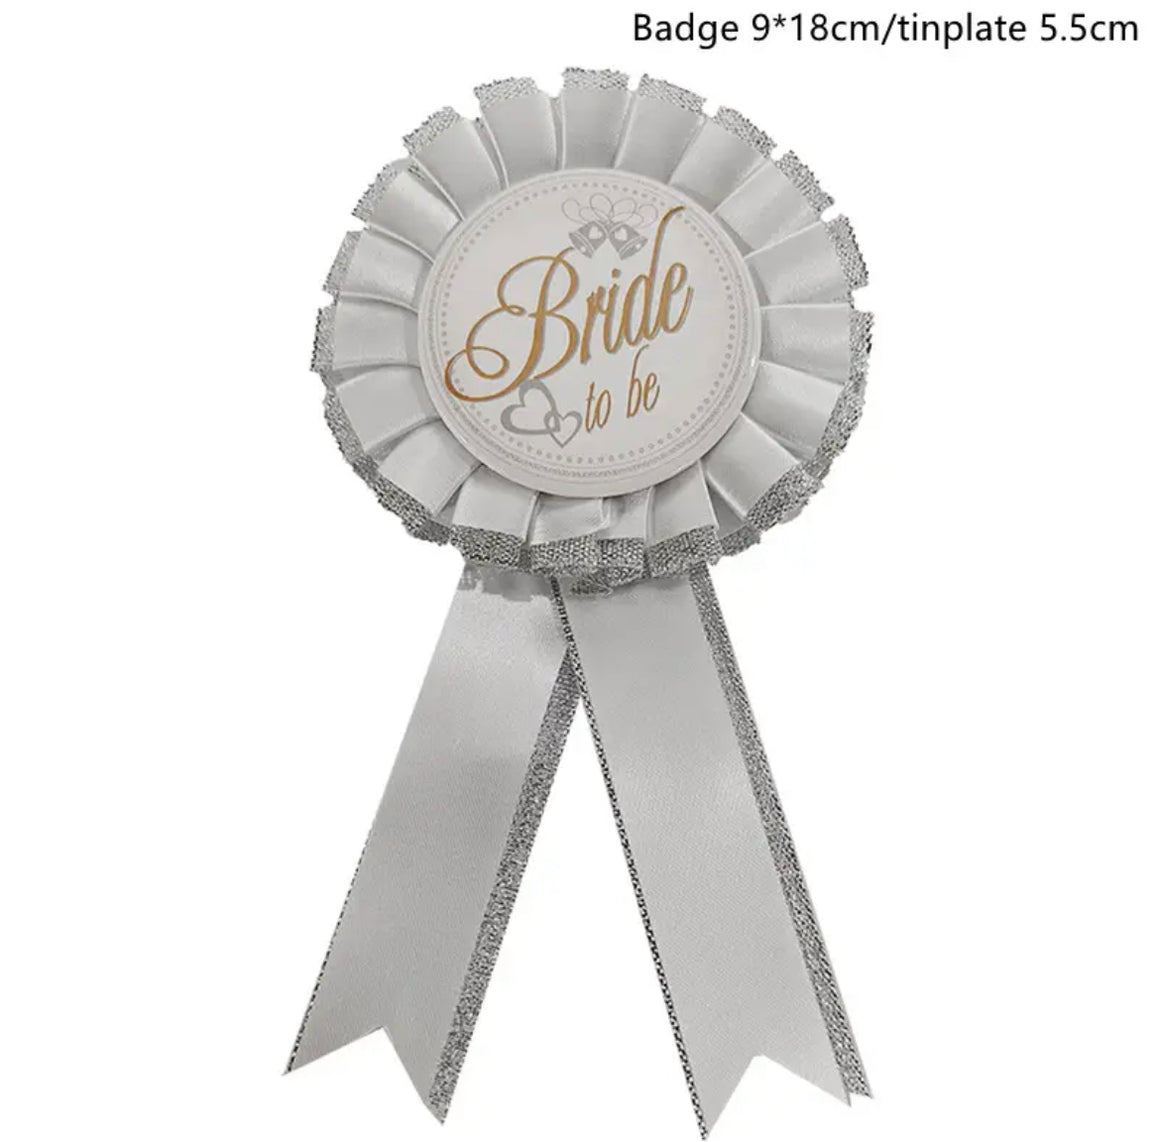 Bride to be - rosette (white and silver)